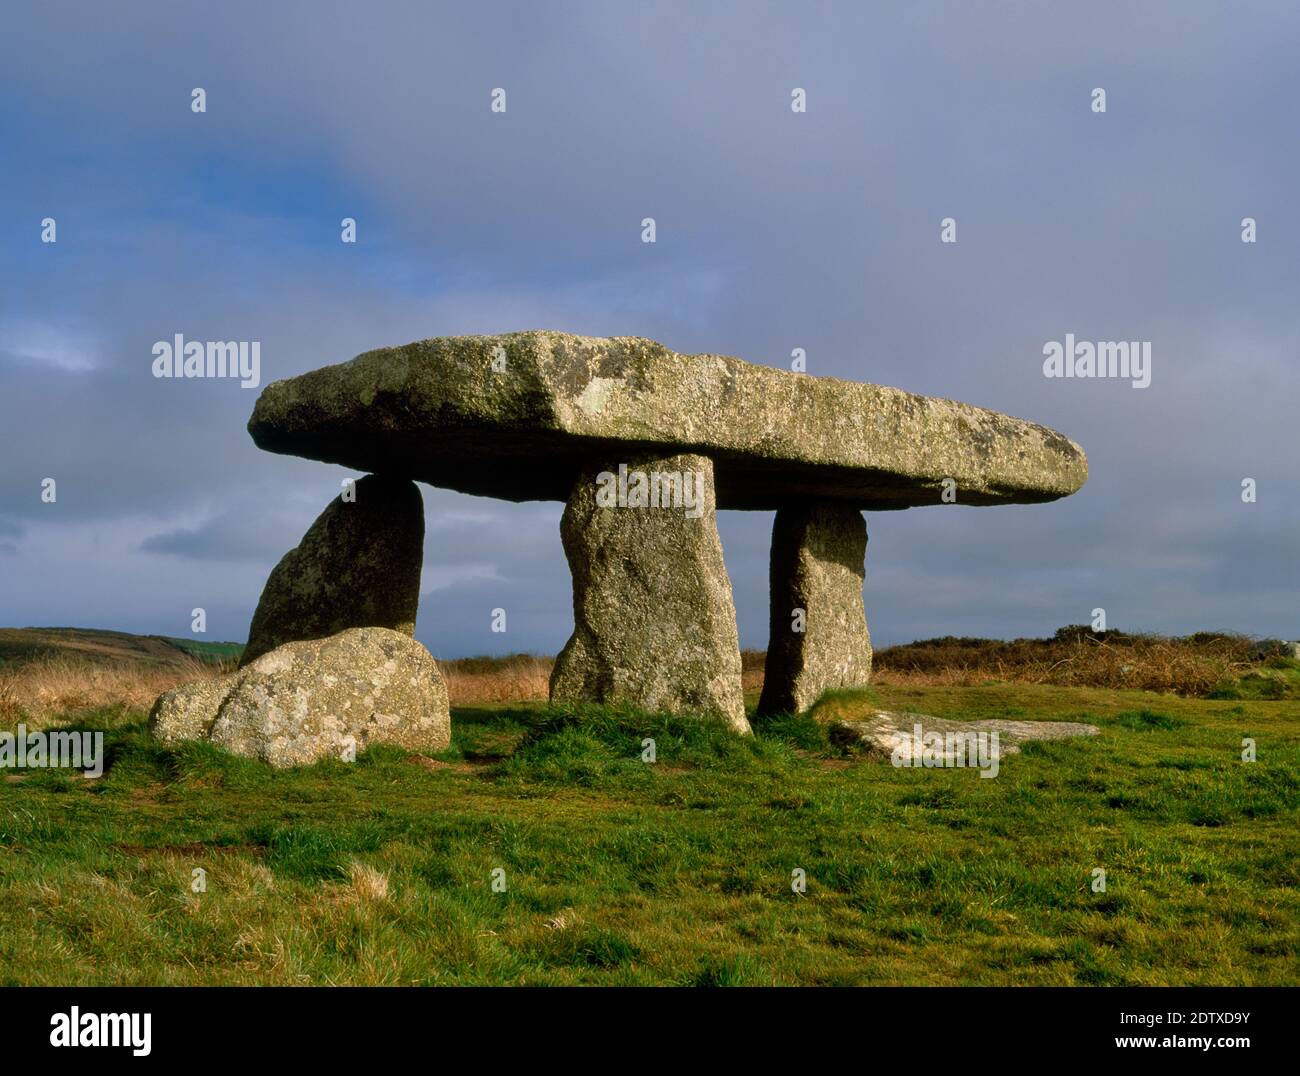 View SSE of Lanyon Quoit, Cornwall, England, UK: a Neolithic burial chamber at the N end of a low long mound containing the remains of burial cists. Stock Photo